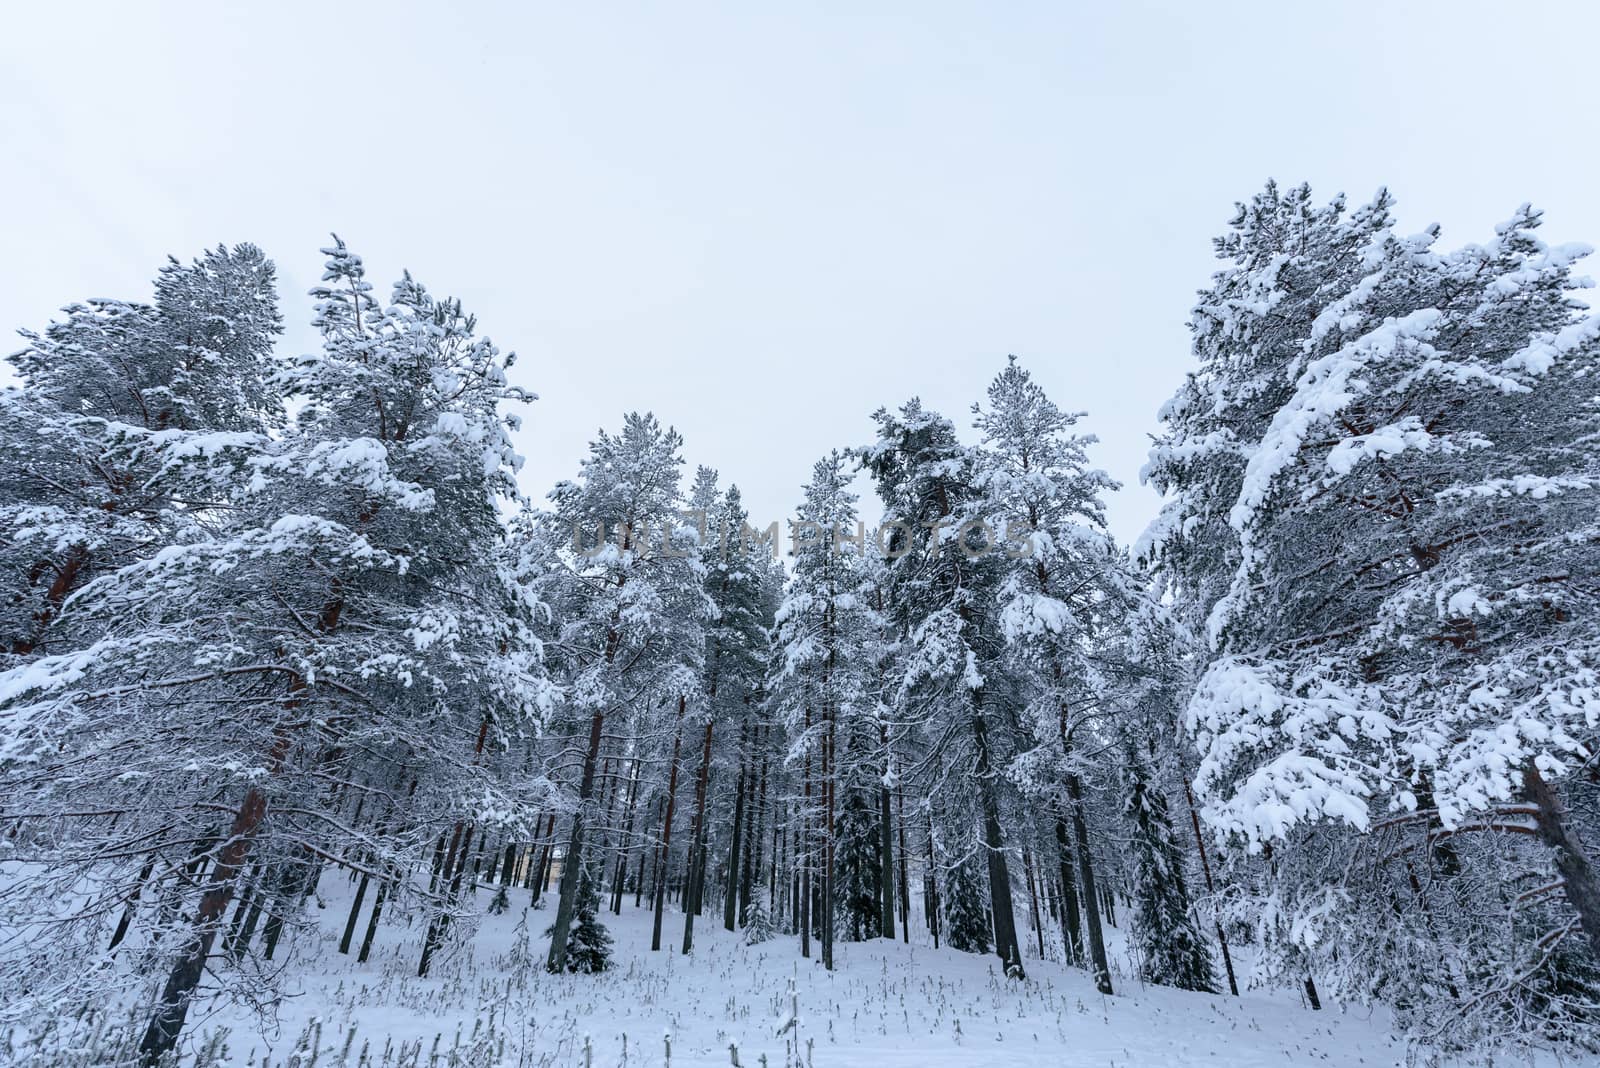 The forest has covered with heavy snow and bad weather sky in wi by animagesdesign